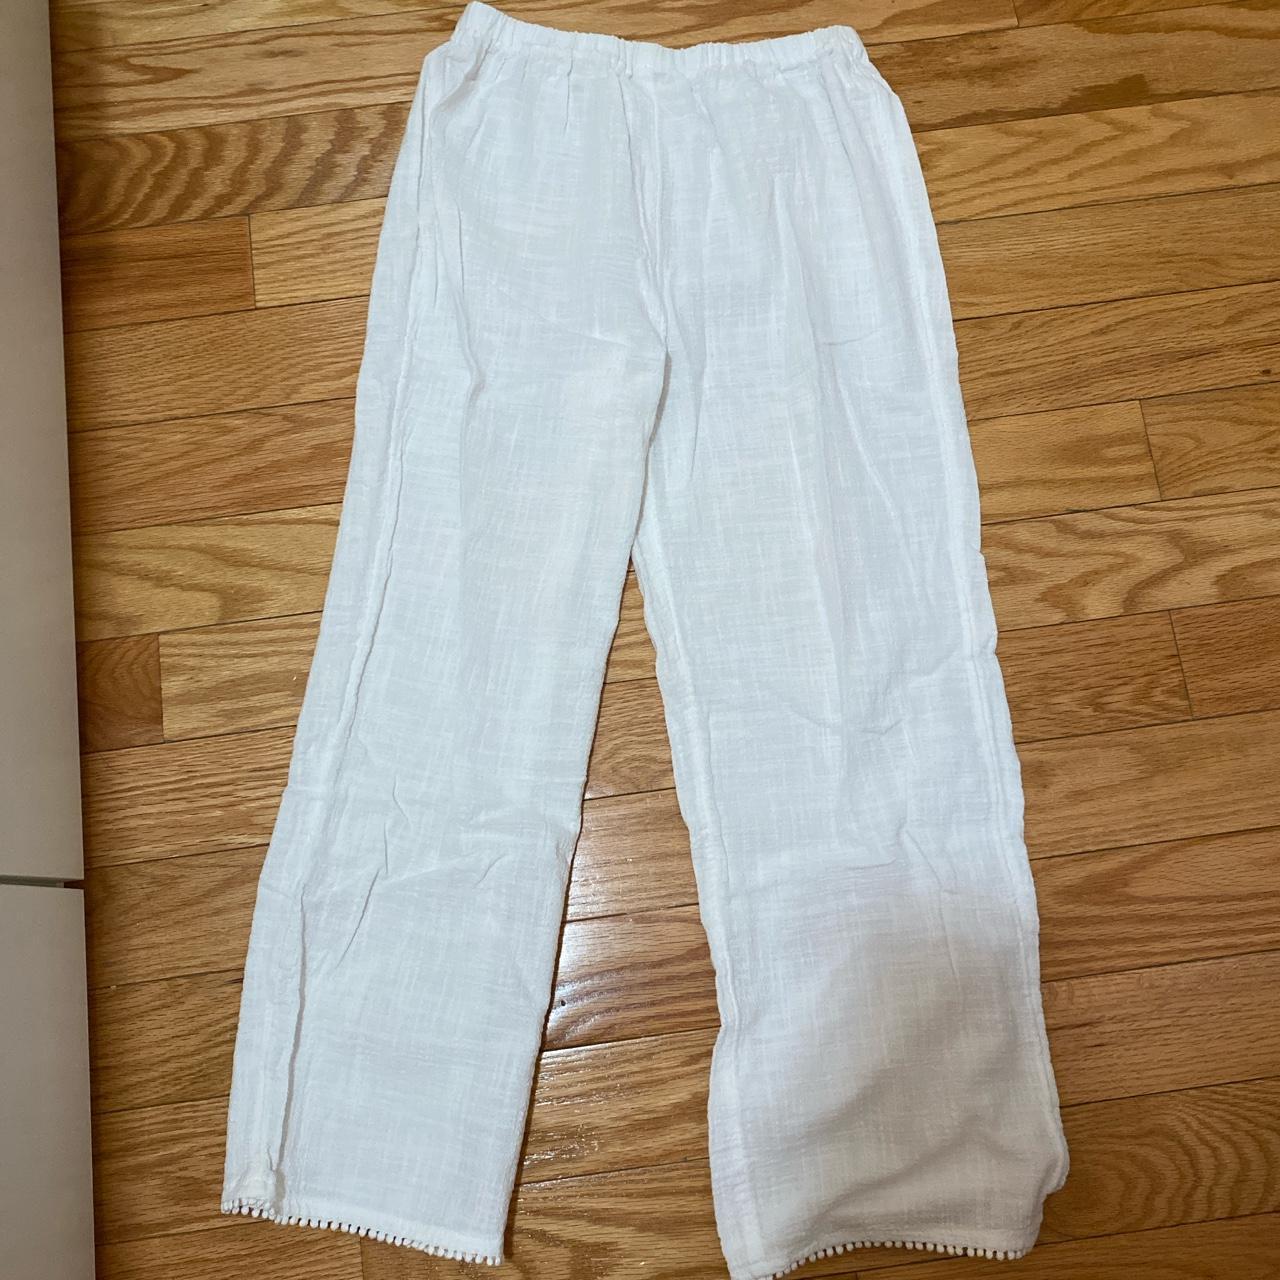 White linen(ish) beach airy light pants! - they’re... - Depop